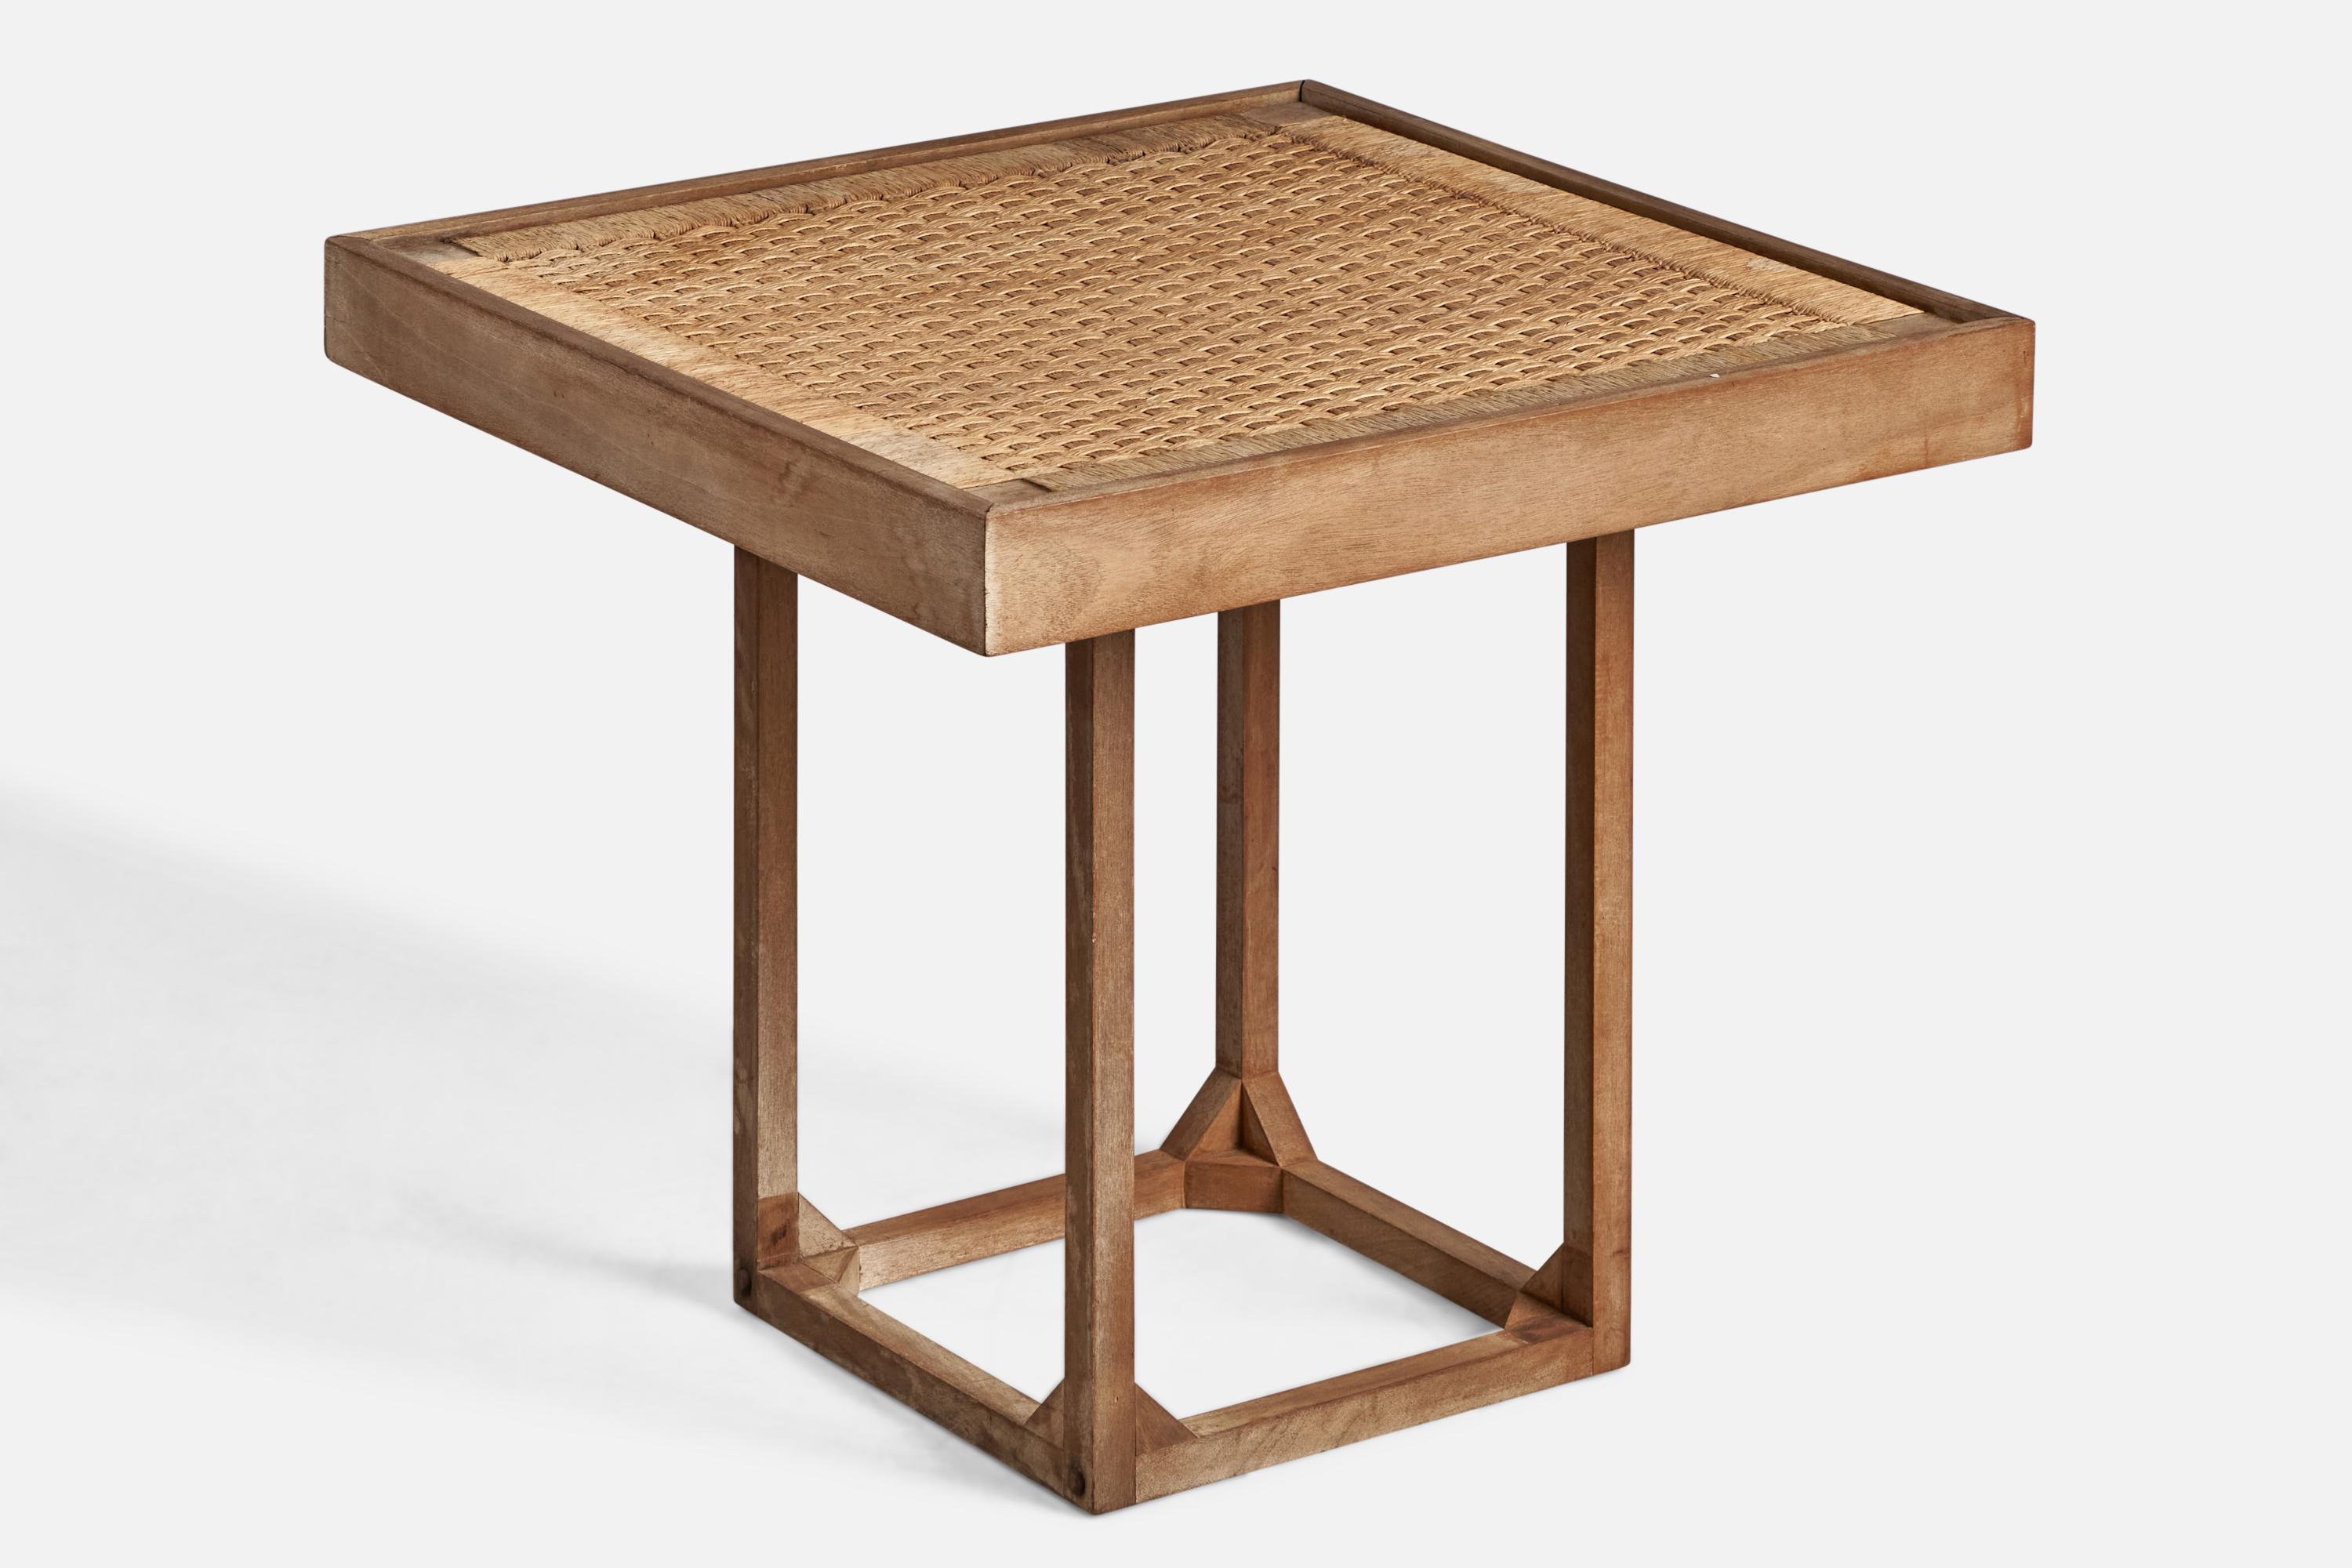 Mid-20th Century Mexican Designer, Table, Oak, Cane, Mexico, 1950s For Sale